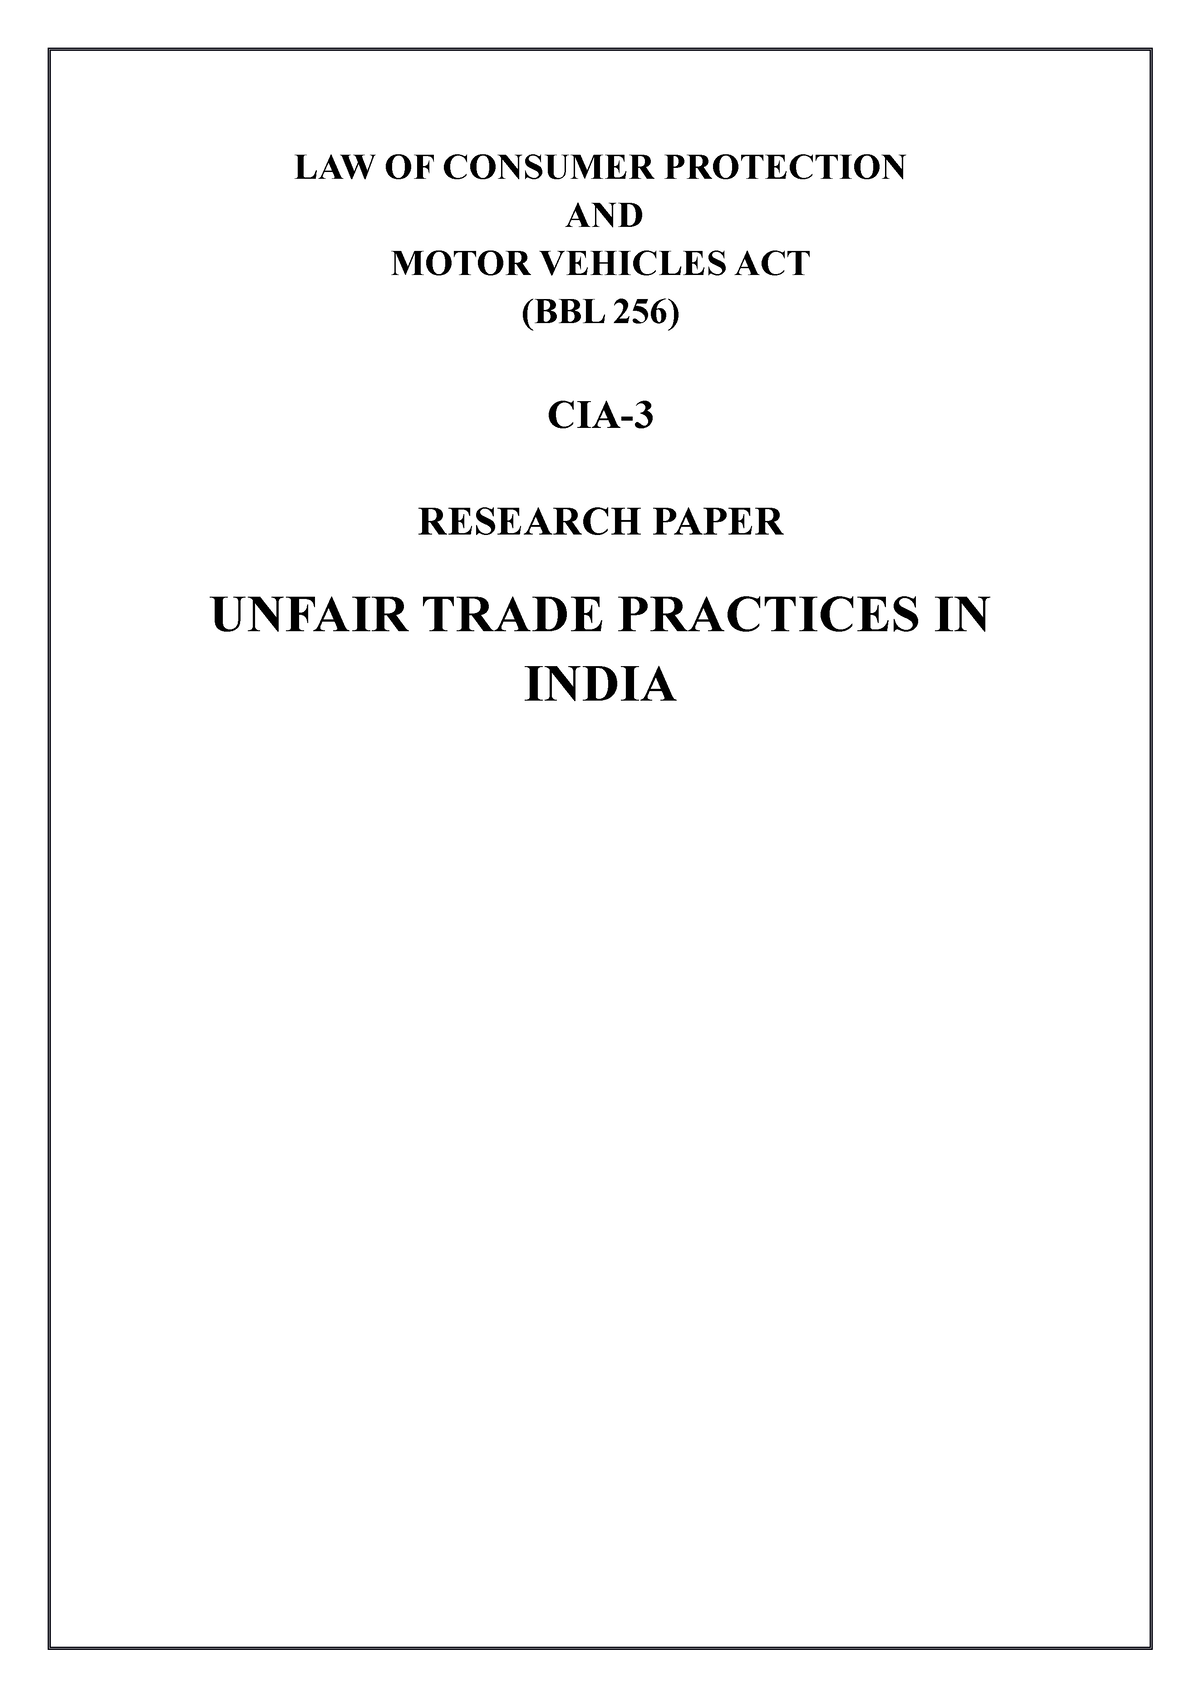 case study on unfair trade practices in india